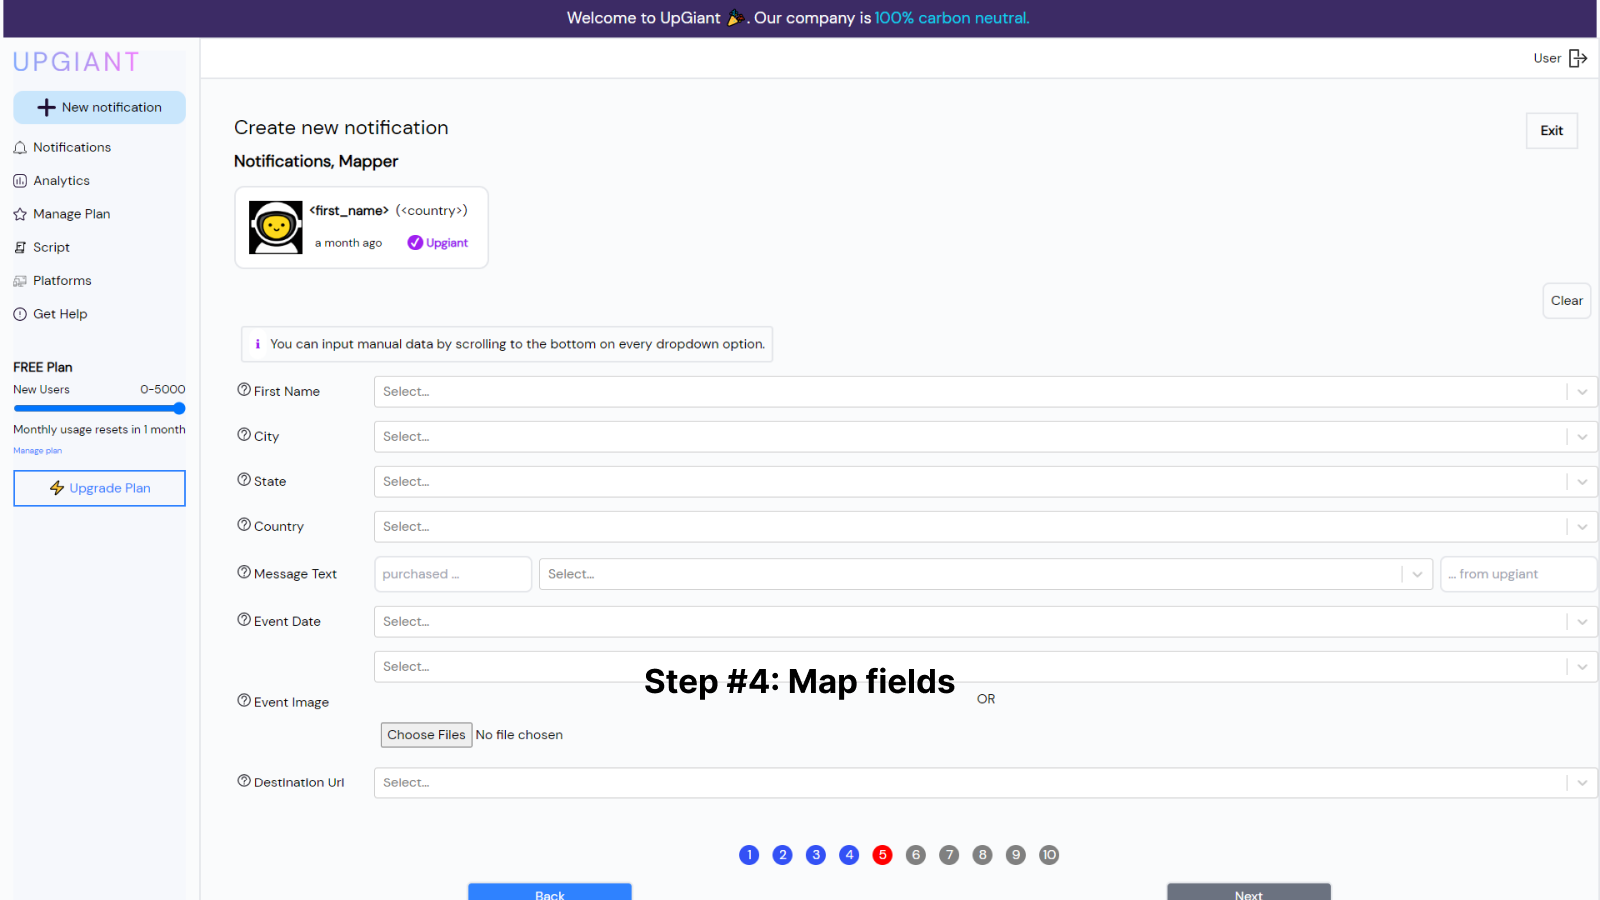 Step 4: Map fields from your app